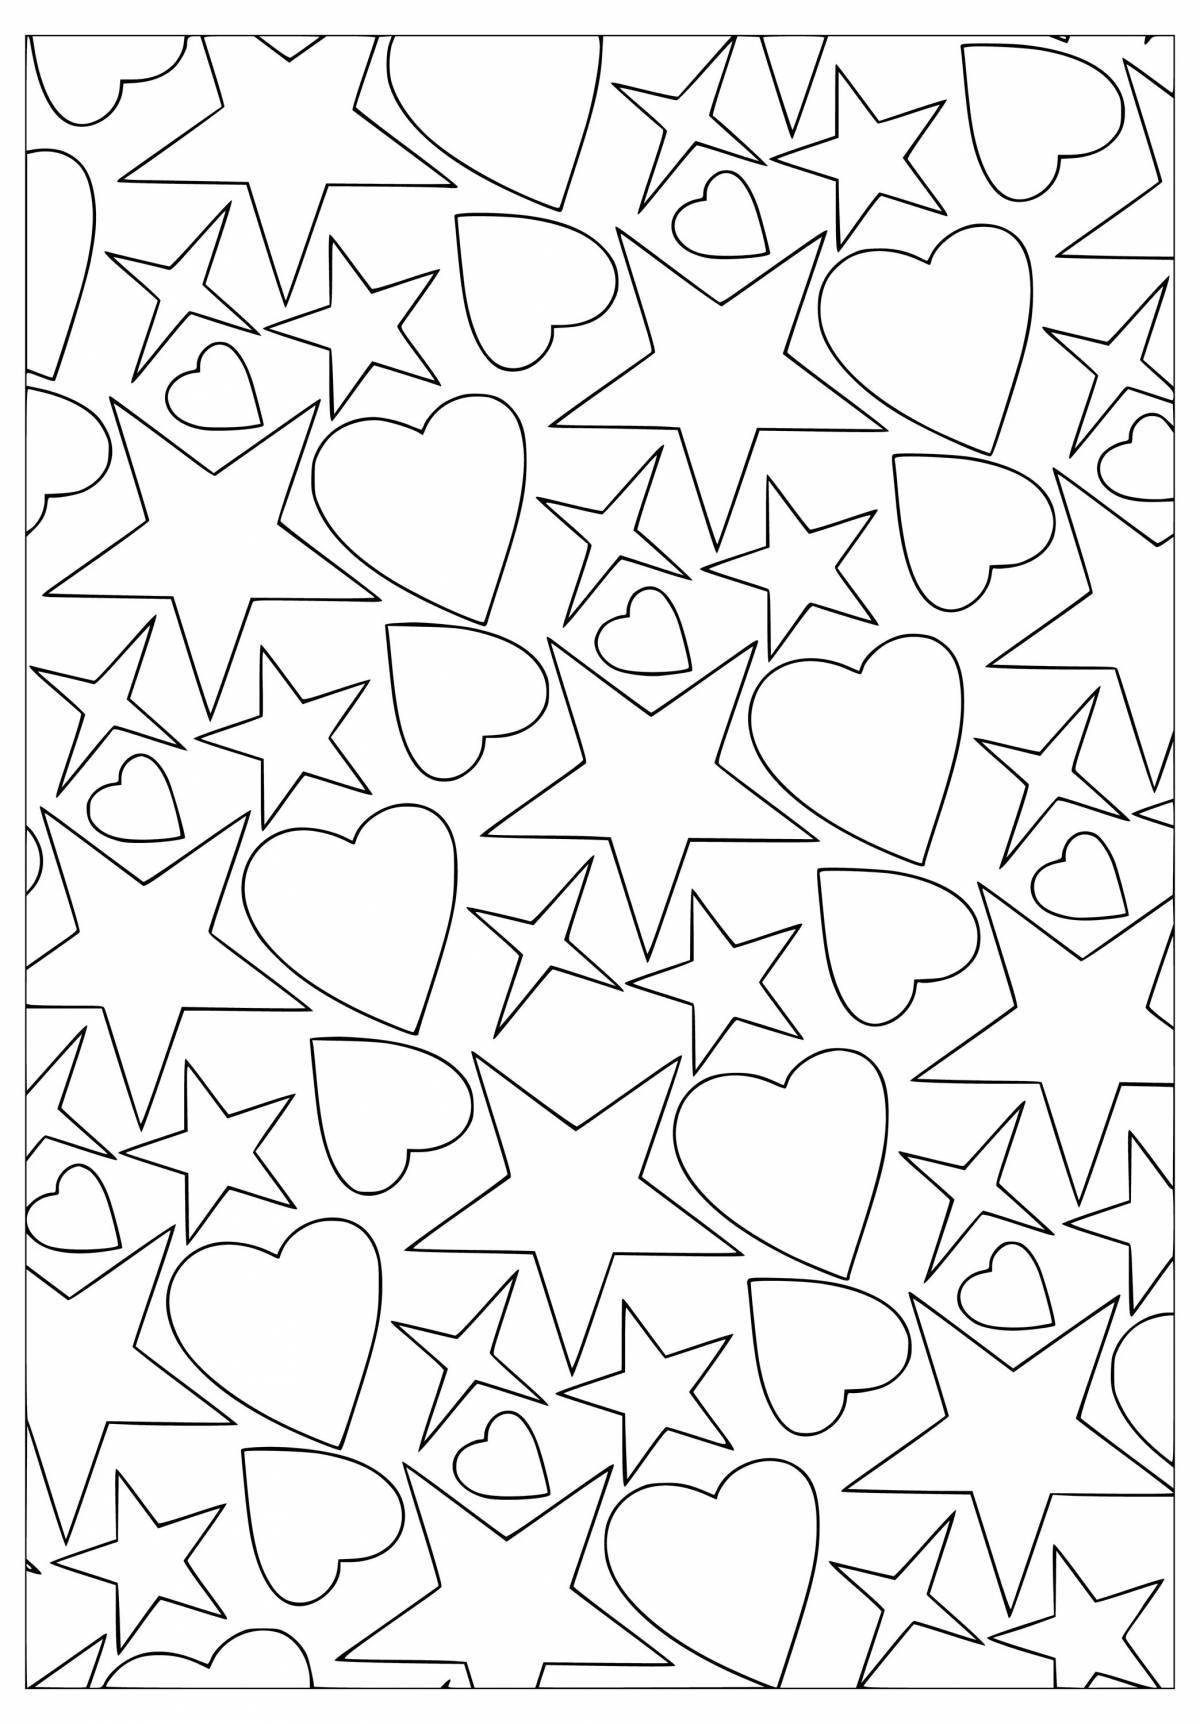 Sparkling little hearts coloring page